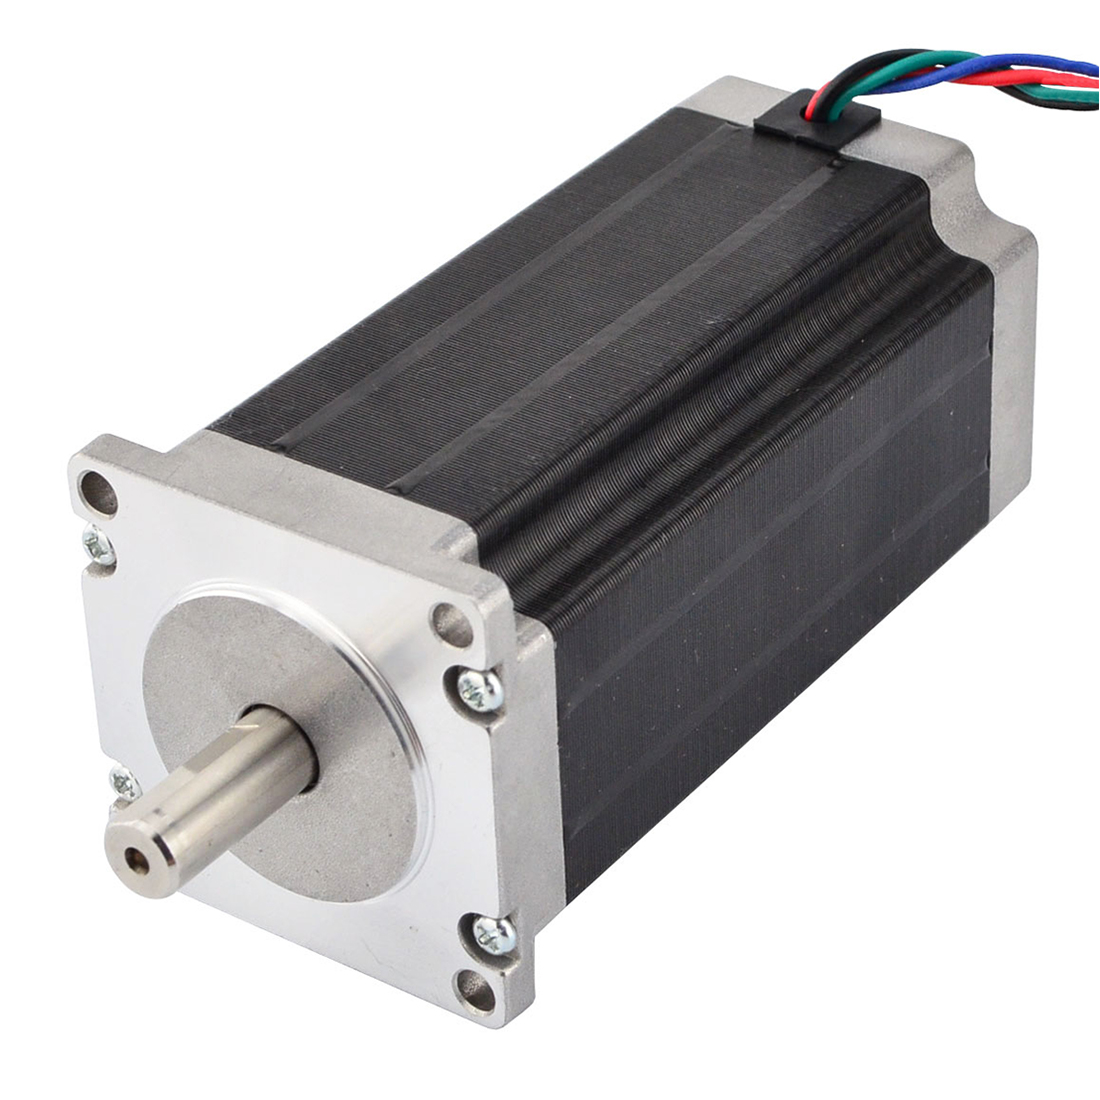 425 oz-in 1/4" dual shaft Stepping Motors Also called Stepper Motors 